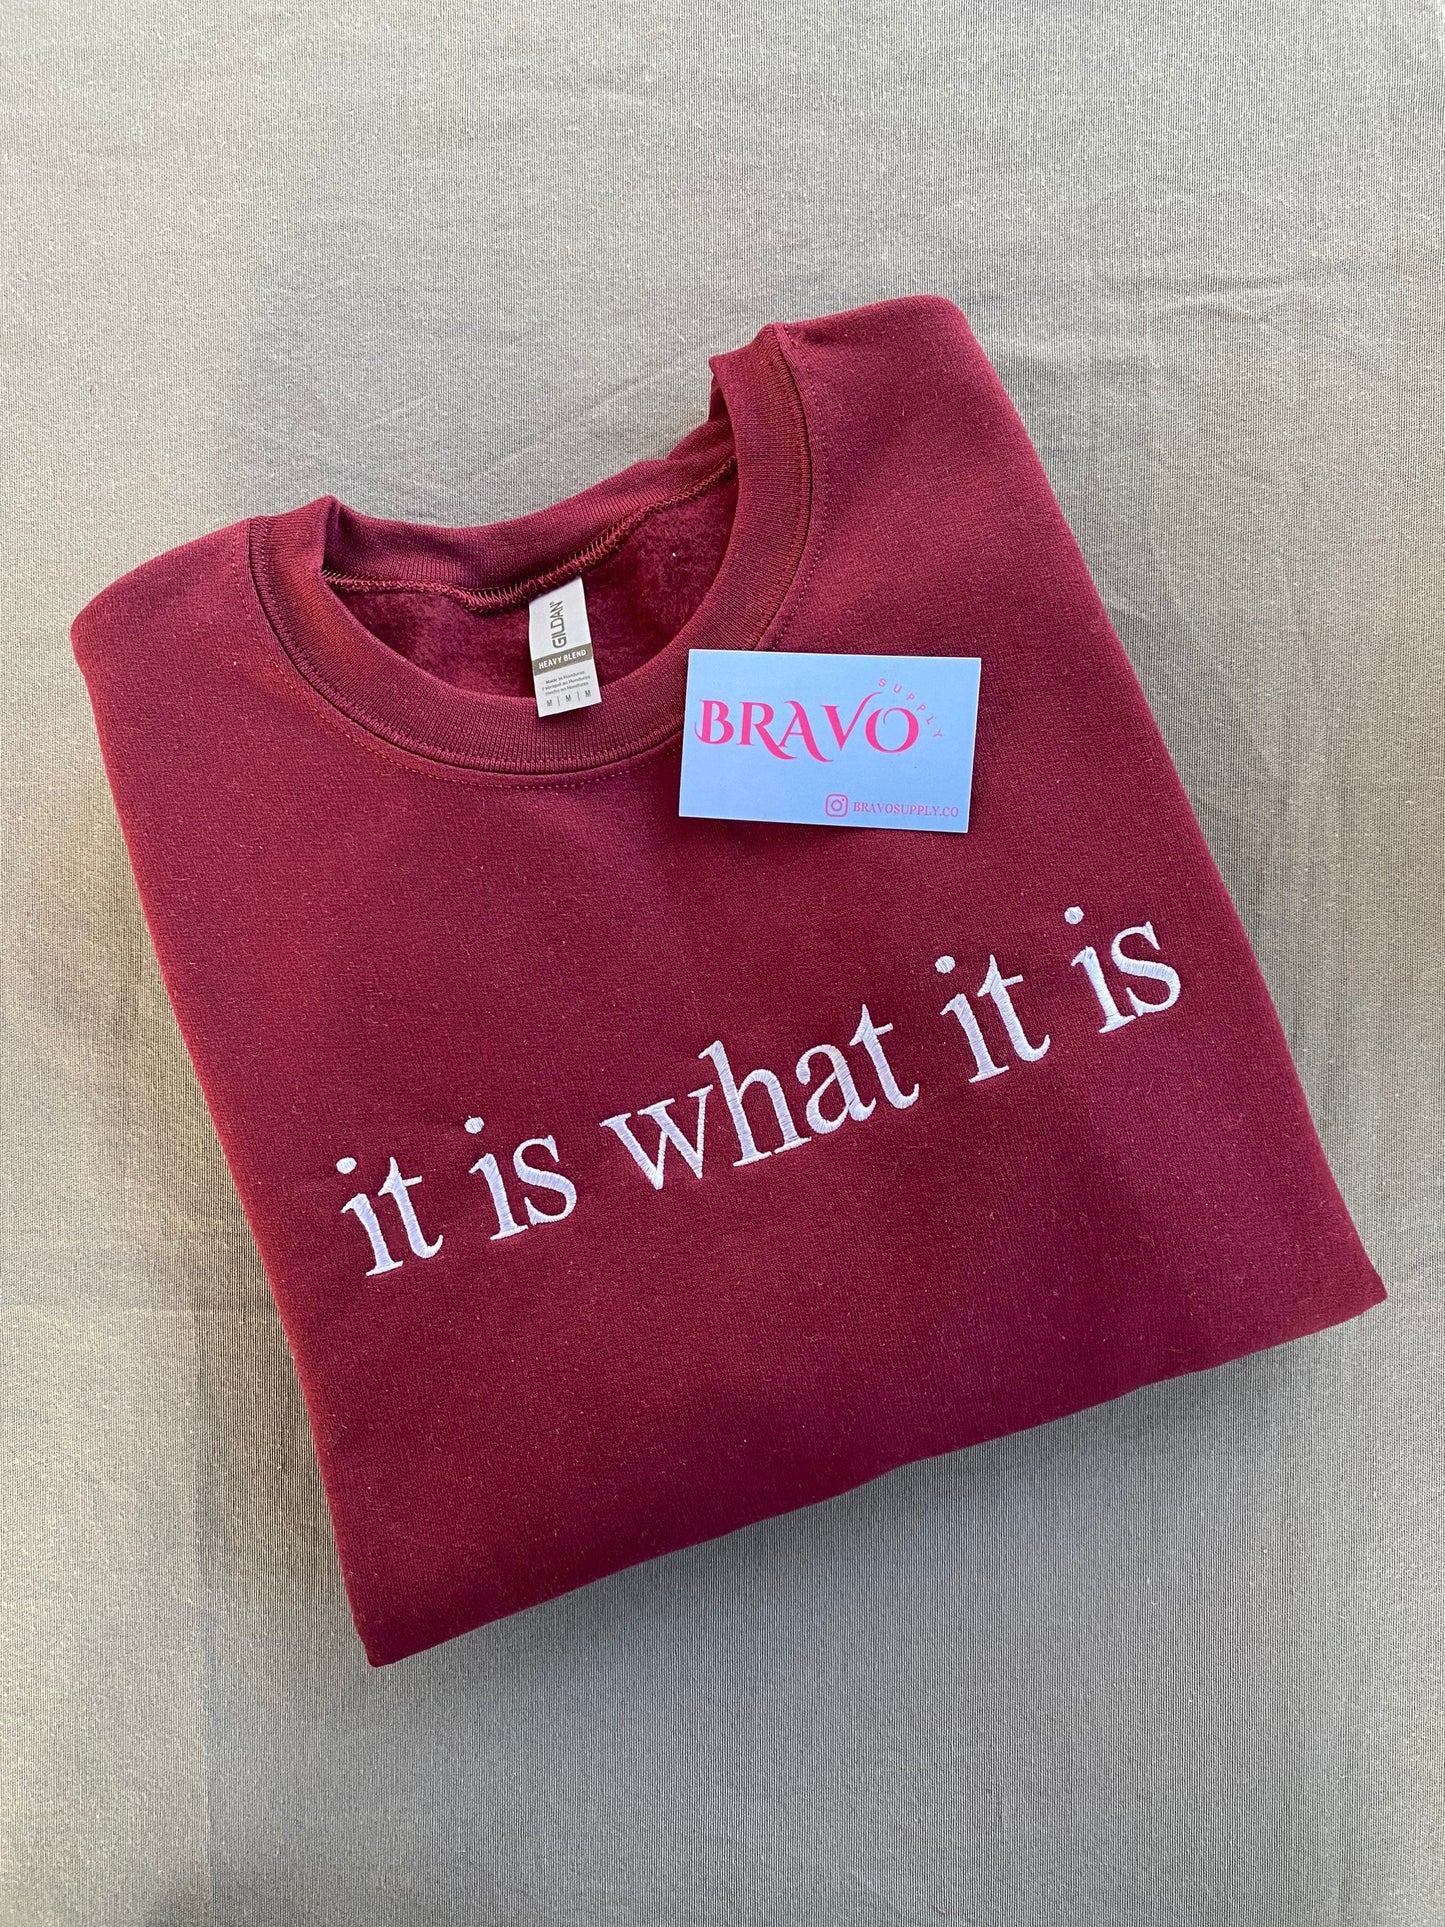 It is what it is embroidered sweatshirt